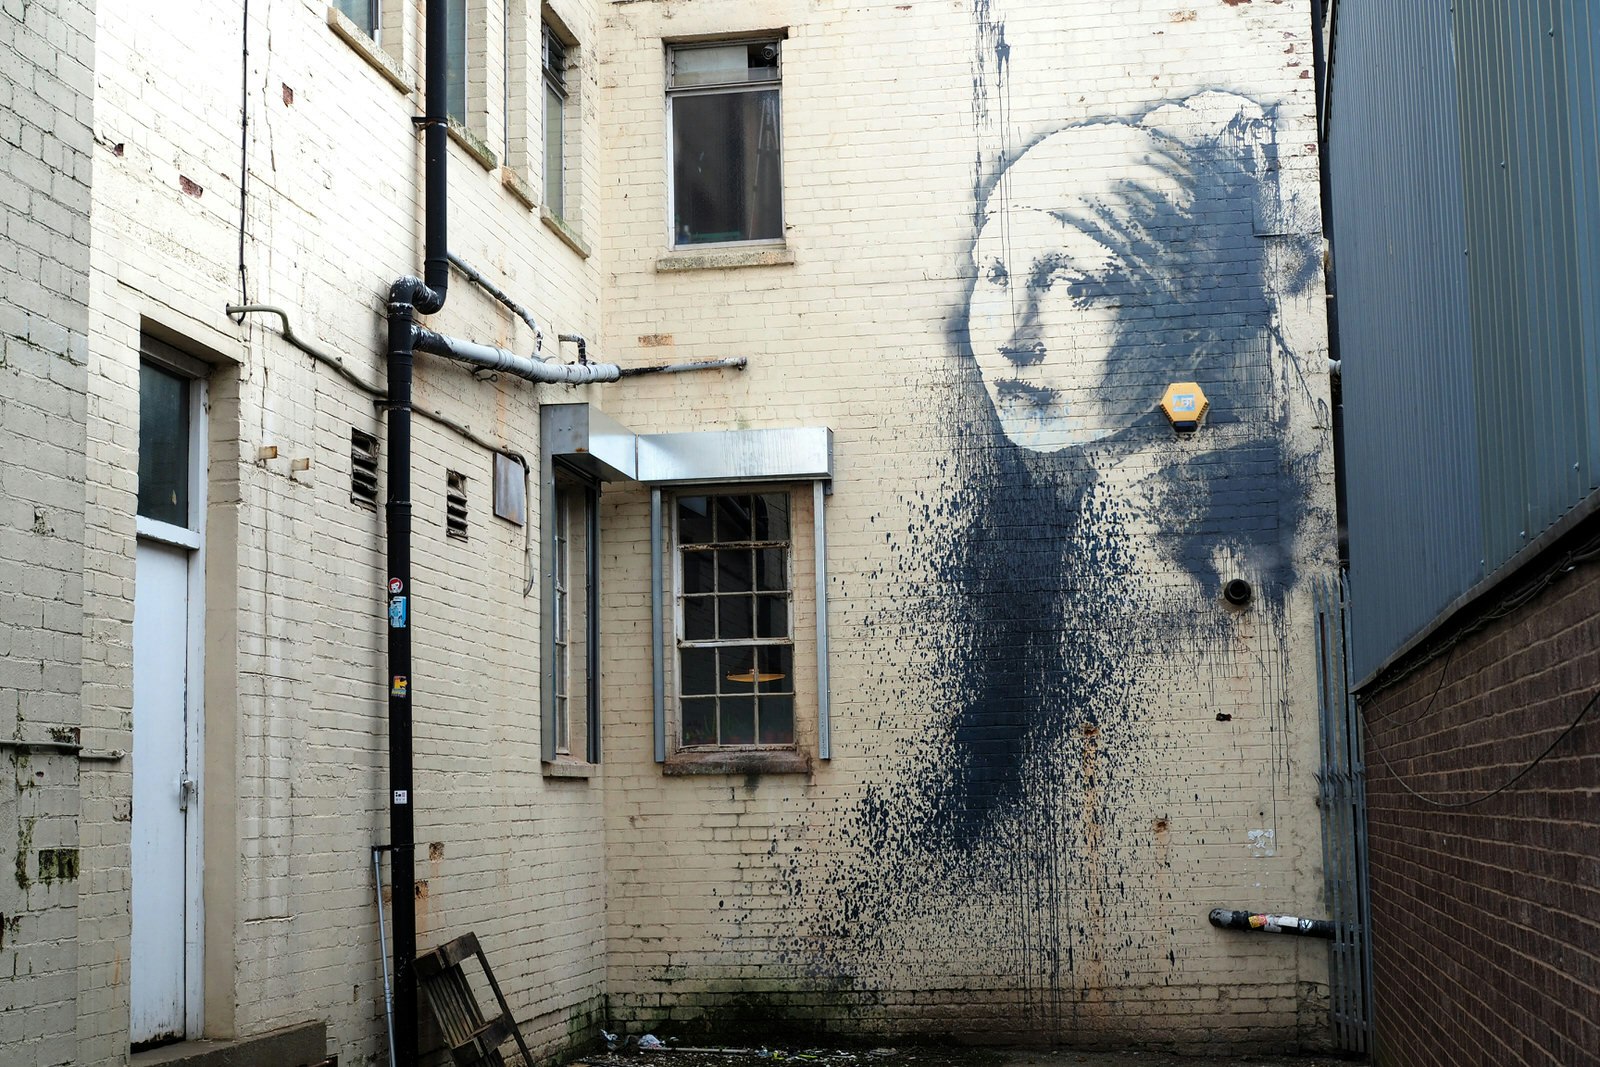 A Banksy mural of "The Girl with the Pierced Eardrum" in Bristol.